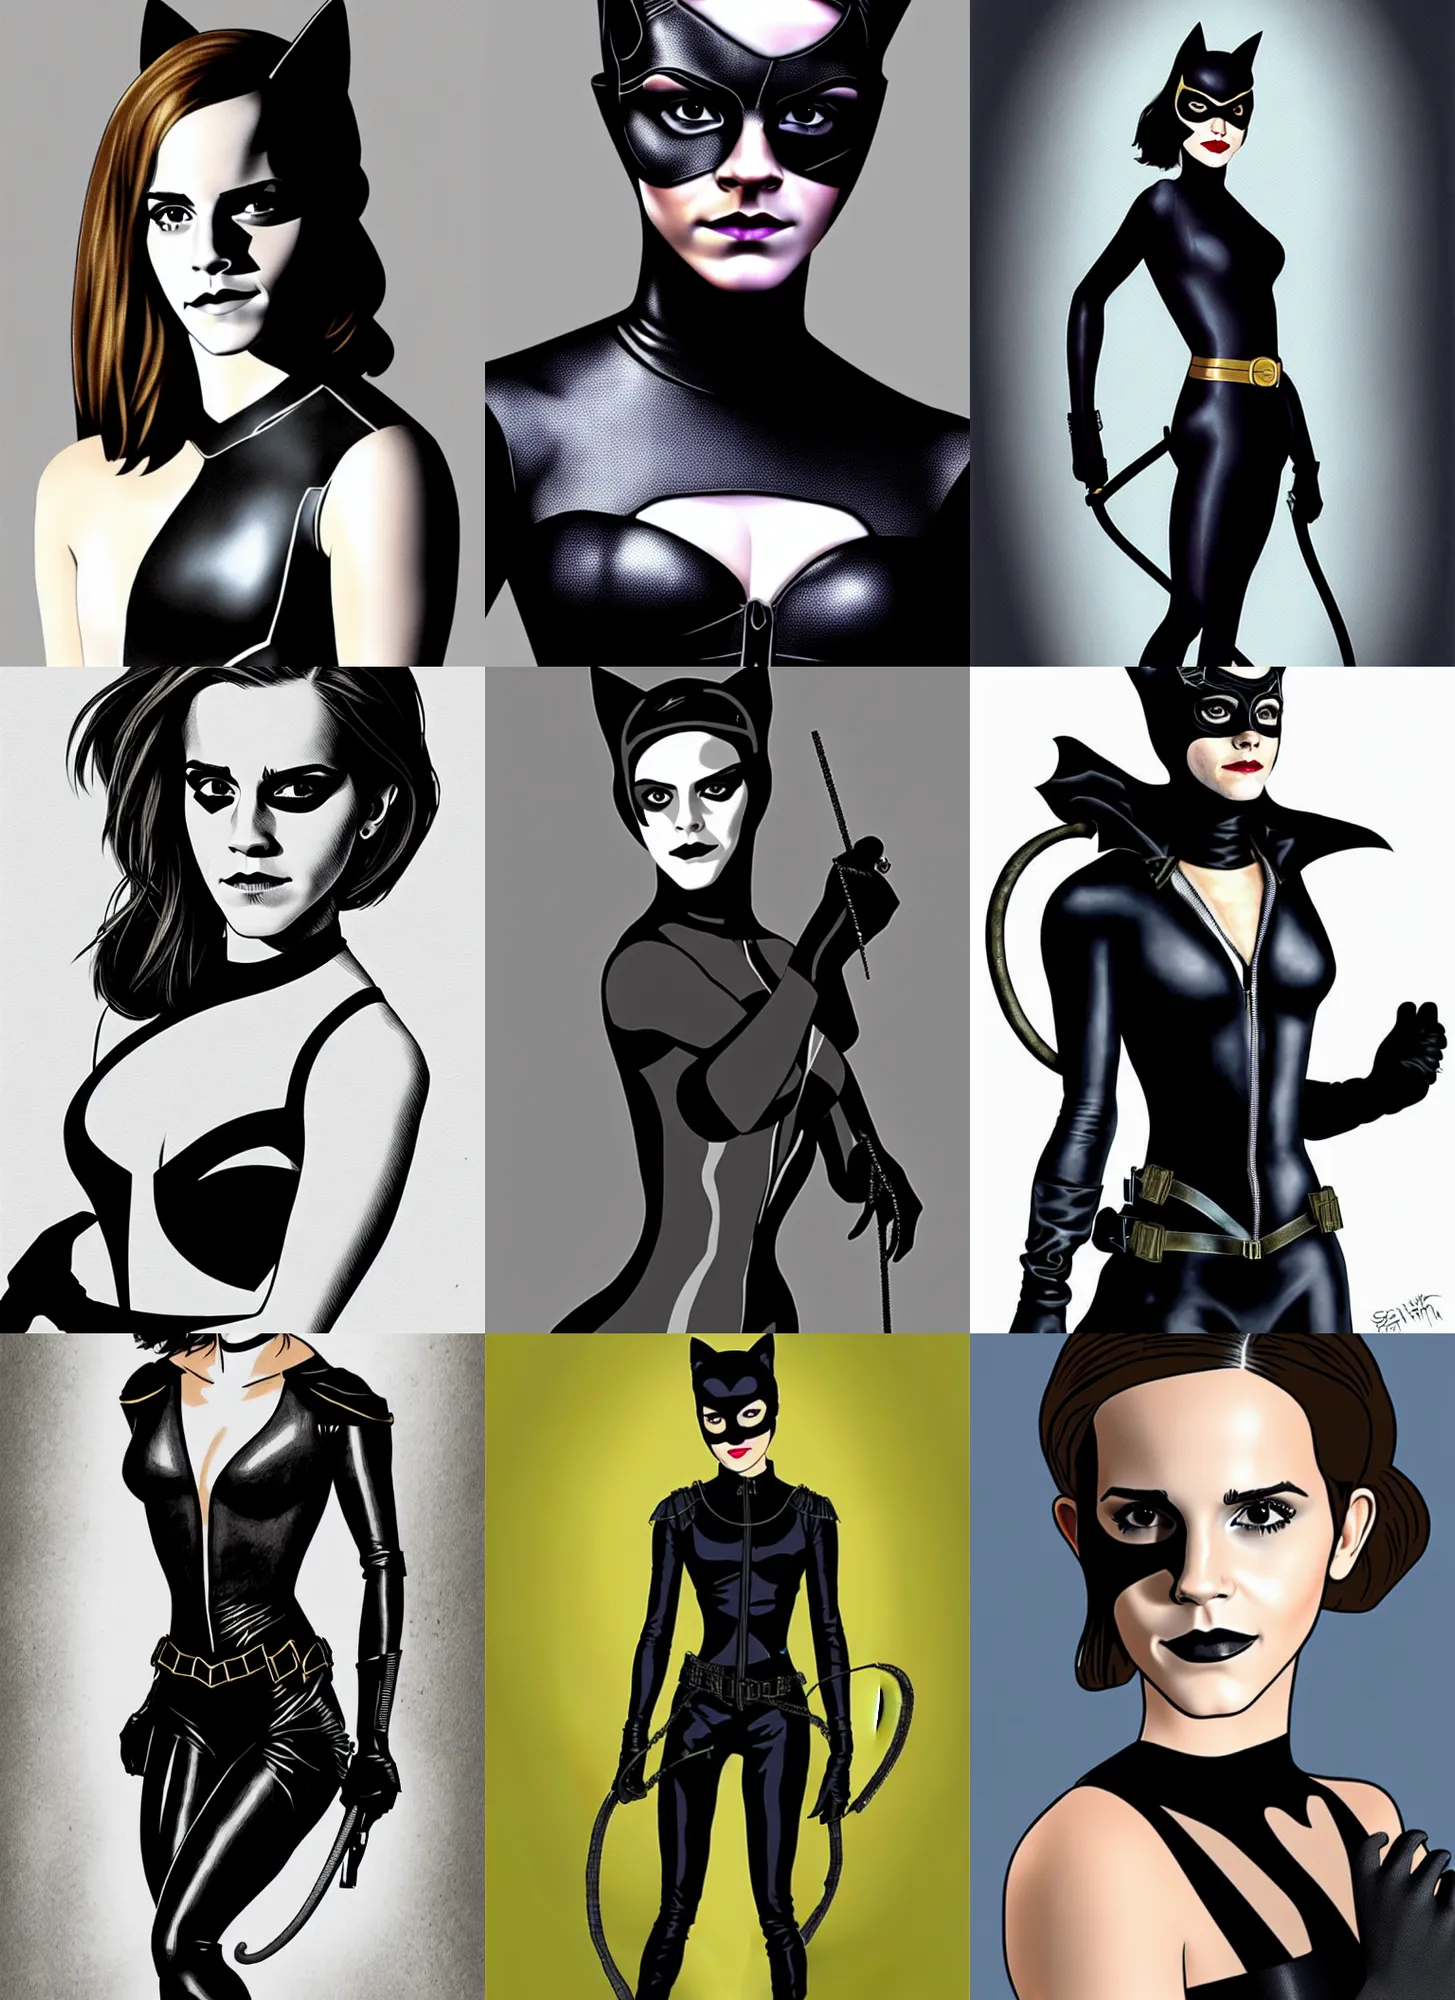 Prompt: emma watson as catwoman in the style of petter hegre, sharp details